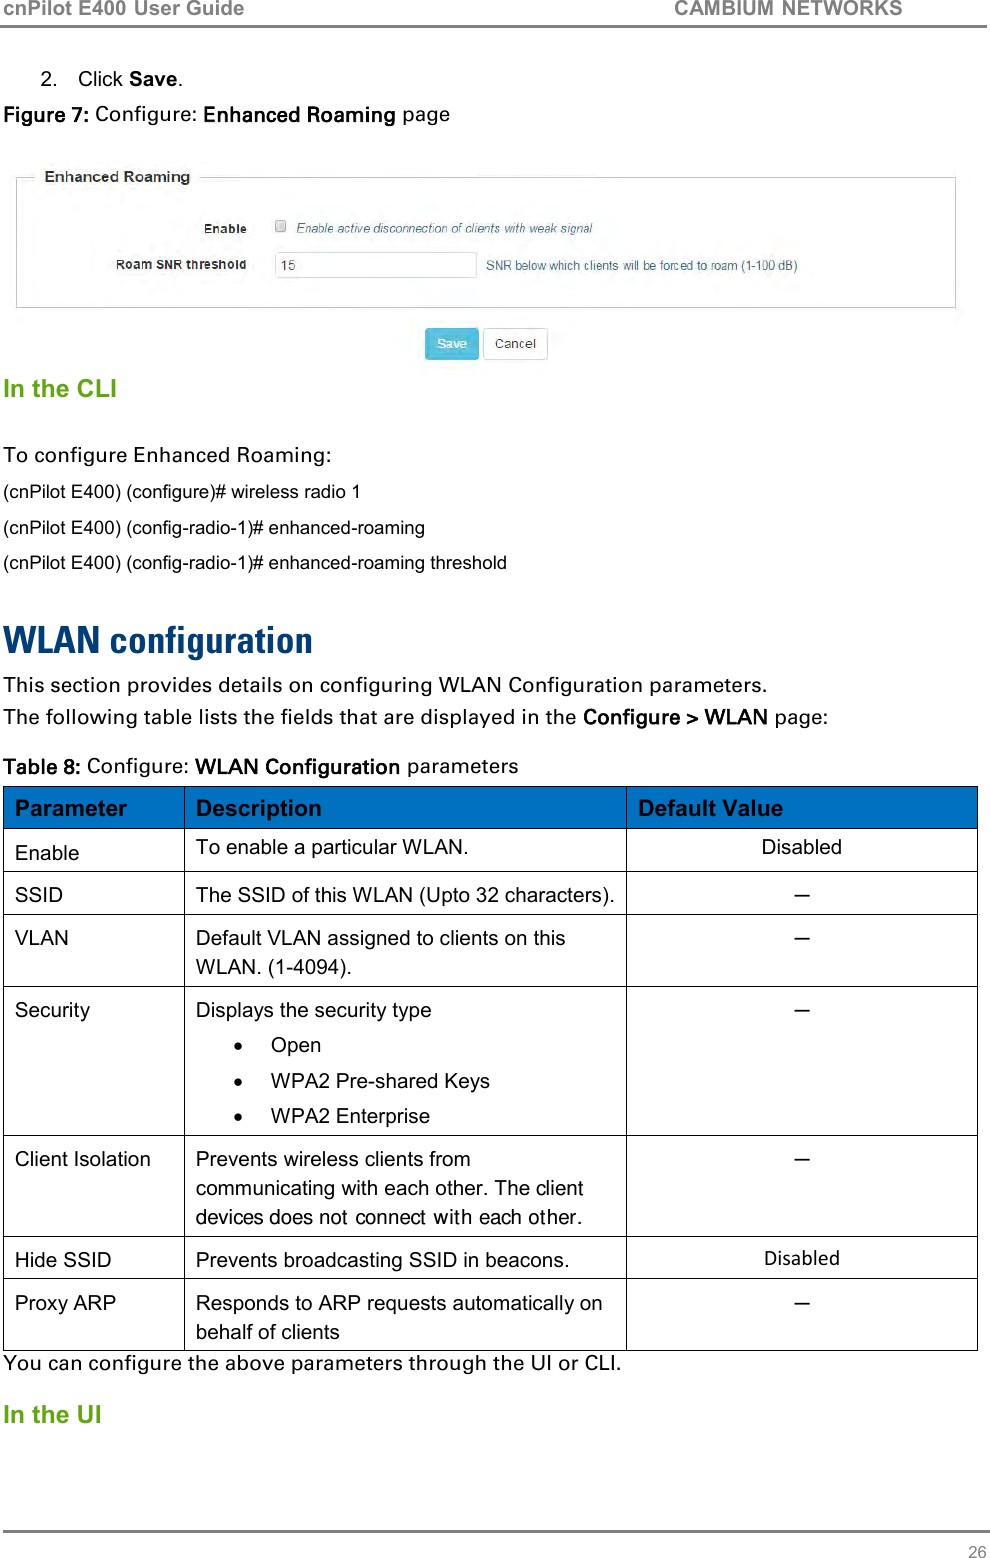 cnPilot E400 User Guide           CAMBIUM NETWORKS   26 2.  Click Save. Figure 7: Configure: Enhanced Roaming page   In the CLI  To configure Enhanced Roaming: (cnPilot E400) (configure)# wireless radio 1 (cnPilot E400) (config-radio-1)# enhanced-roaming  (cnPilot E400) (config-radio-1)# enhanced-roaming threshold  WLAN configuration This section provides details on configuring WLAN Configuration parameters. The following table lists the fields that are displayed in the Configure &gt; WLAN page:  Table 8: Configure: WLAN Configuration parameters Parameter Description Default Value Enable To enable a particular WLAN. Disabled SSID The SSID of this WLAN (Upto 32 characters). ─ VLAN Default VLAN assigned to clients on this WLAN. (1-4094). ─ Security Displays the security type   Open   WPA2 Pre-shared Keys   WPA2 Enterprise ─ Client Isolation Prevents wireless clients from communicating with each other. The client devices does not connect with each other. ─ Hide SSID Prevents broadcasting SSID in beacons. Disabled Proxy ARP Responds to ARP requests automatically on behalf of clients ─ You can configure the above parameters through the UI or CLI.  In the UI 